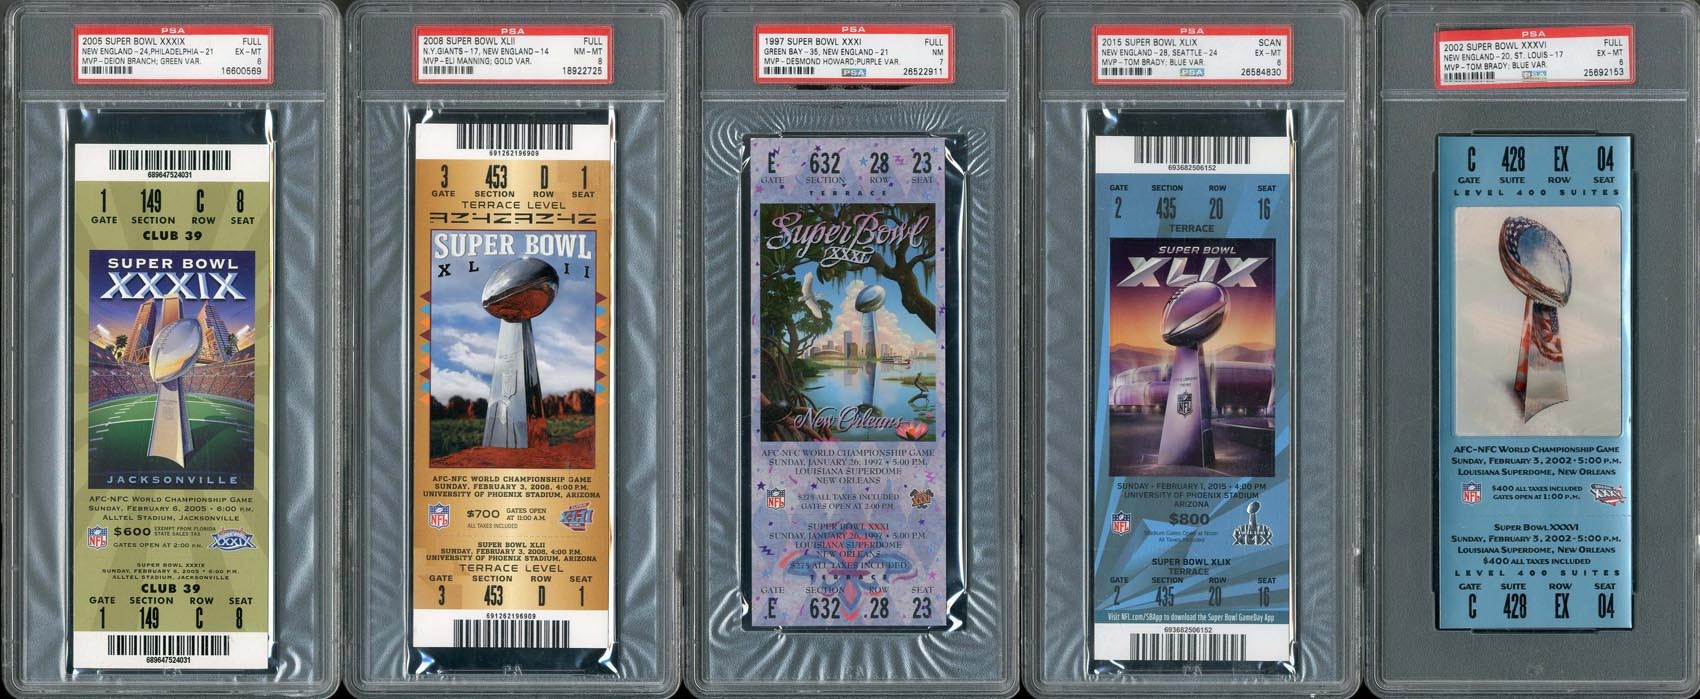 Boston Sports - Every New England Patriots Super Bowl Appearance Ticket Collection (Some PSA Graded)